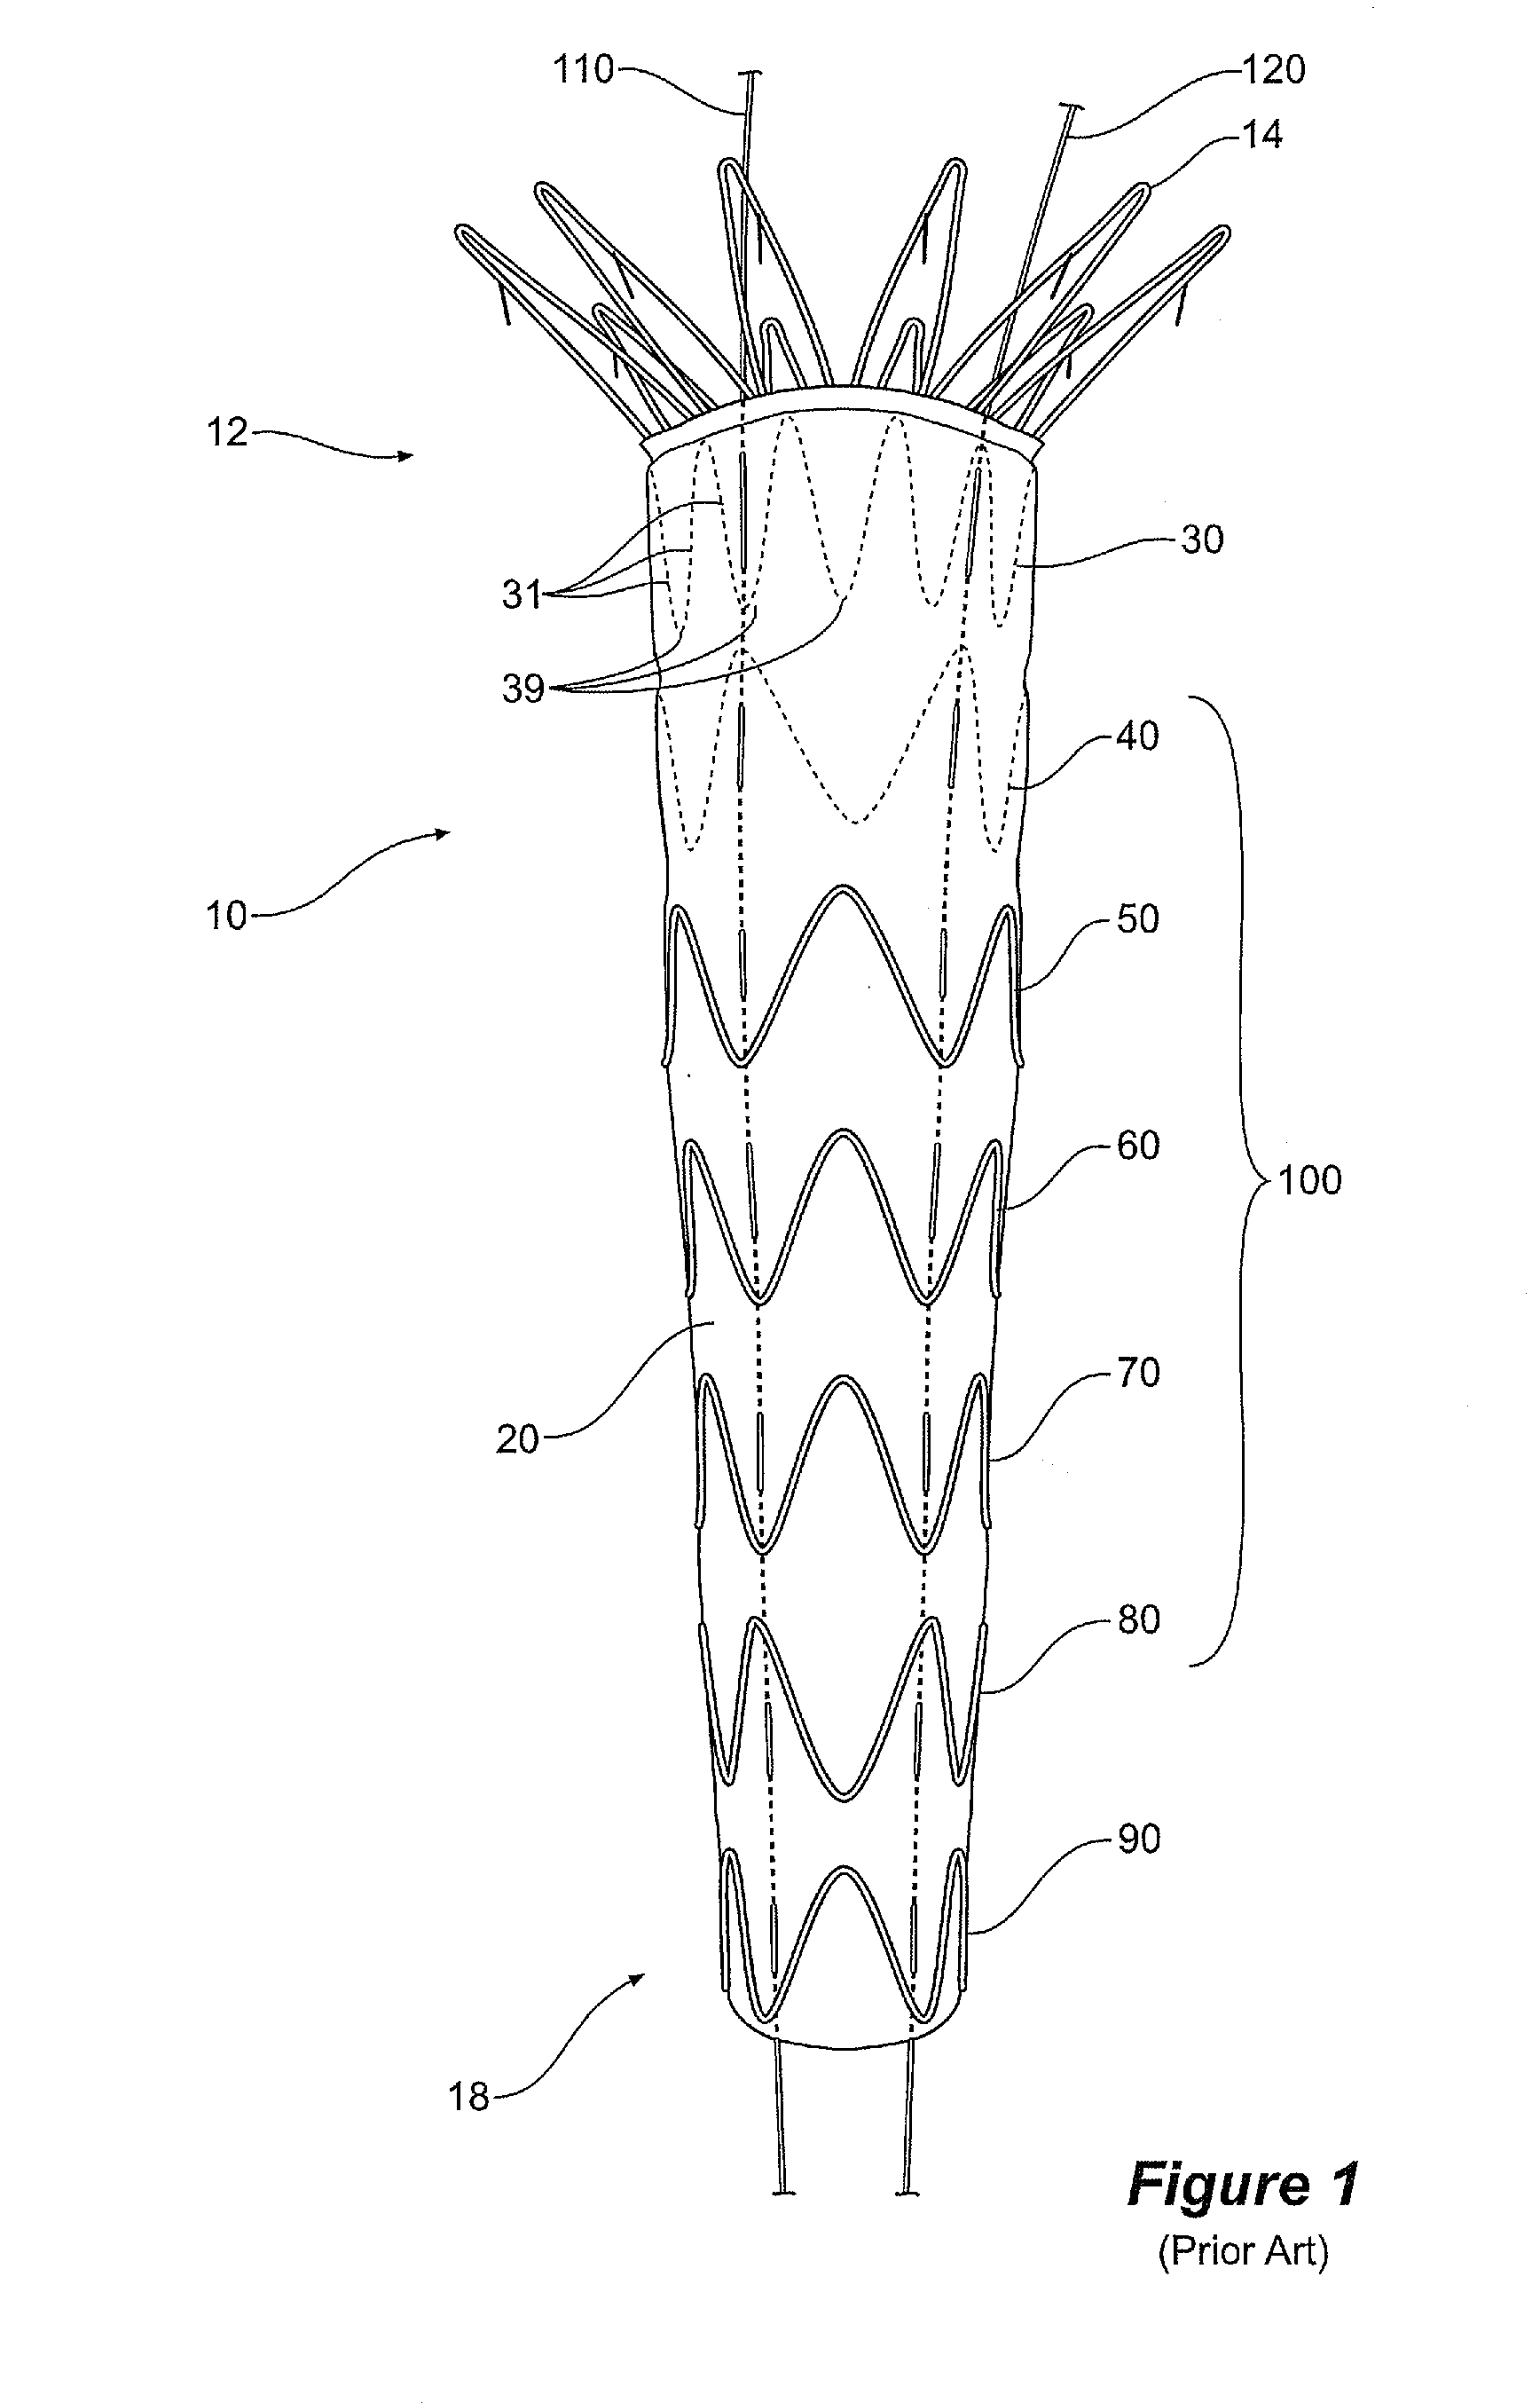 Assembly of stent grafts with diameter reducing ties